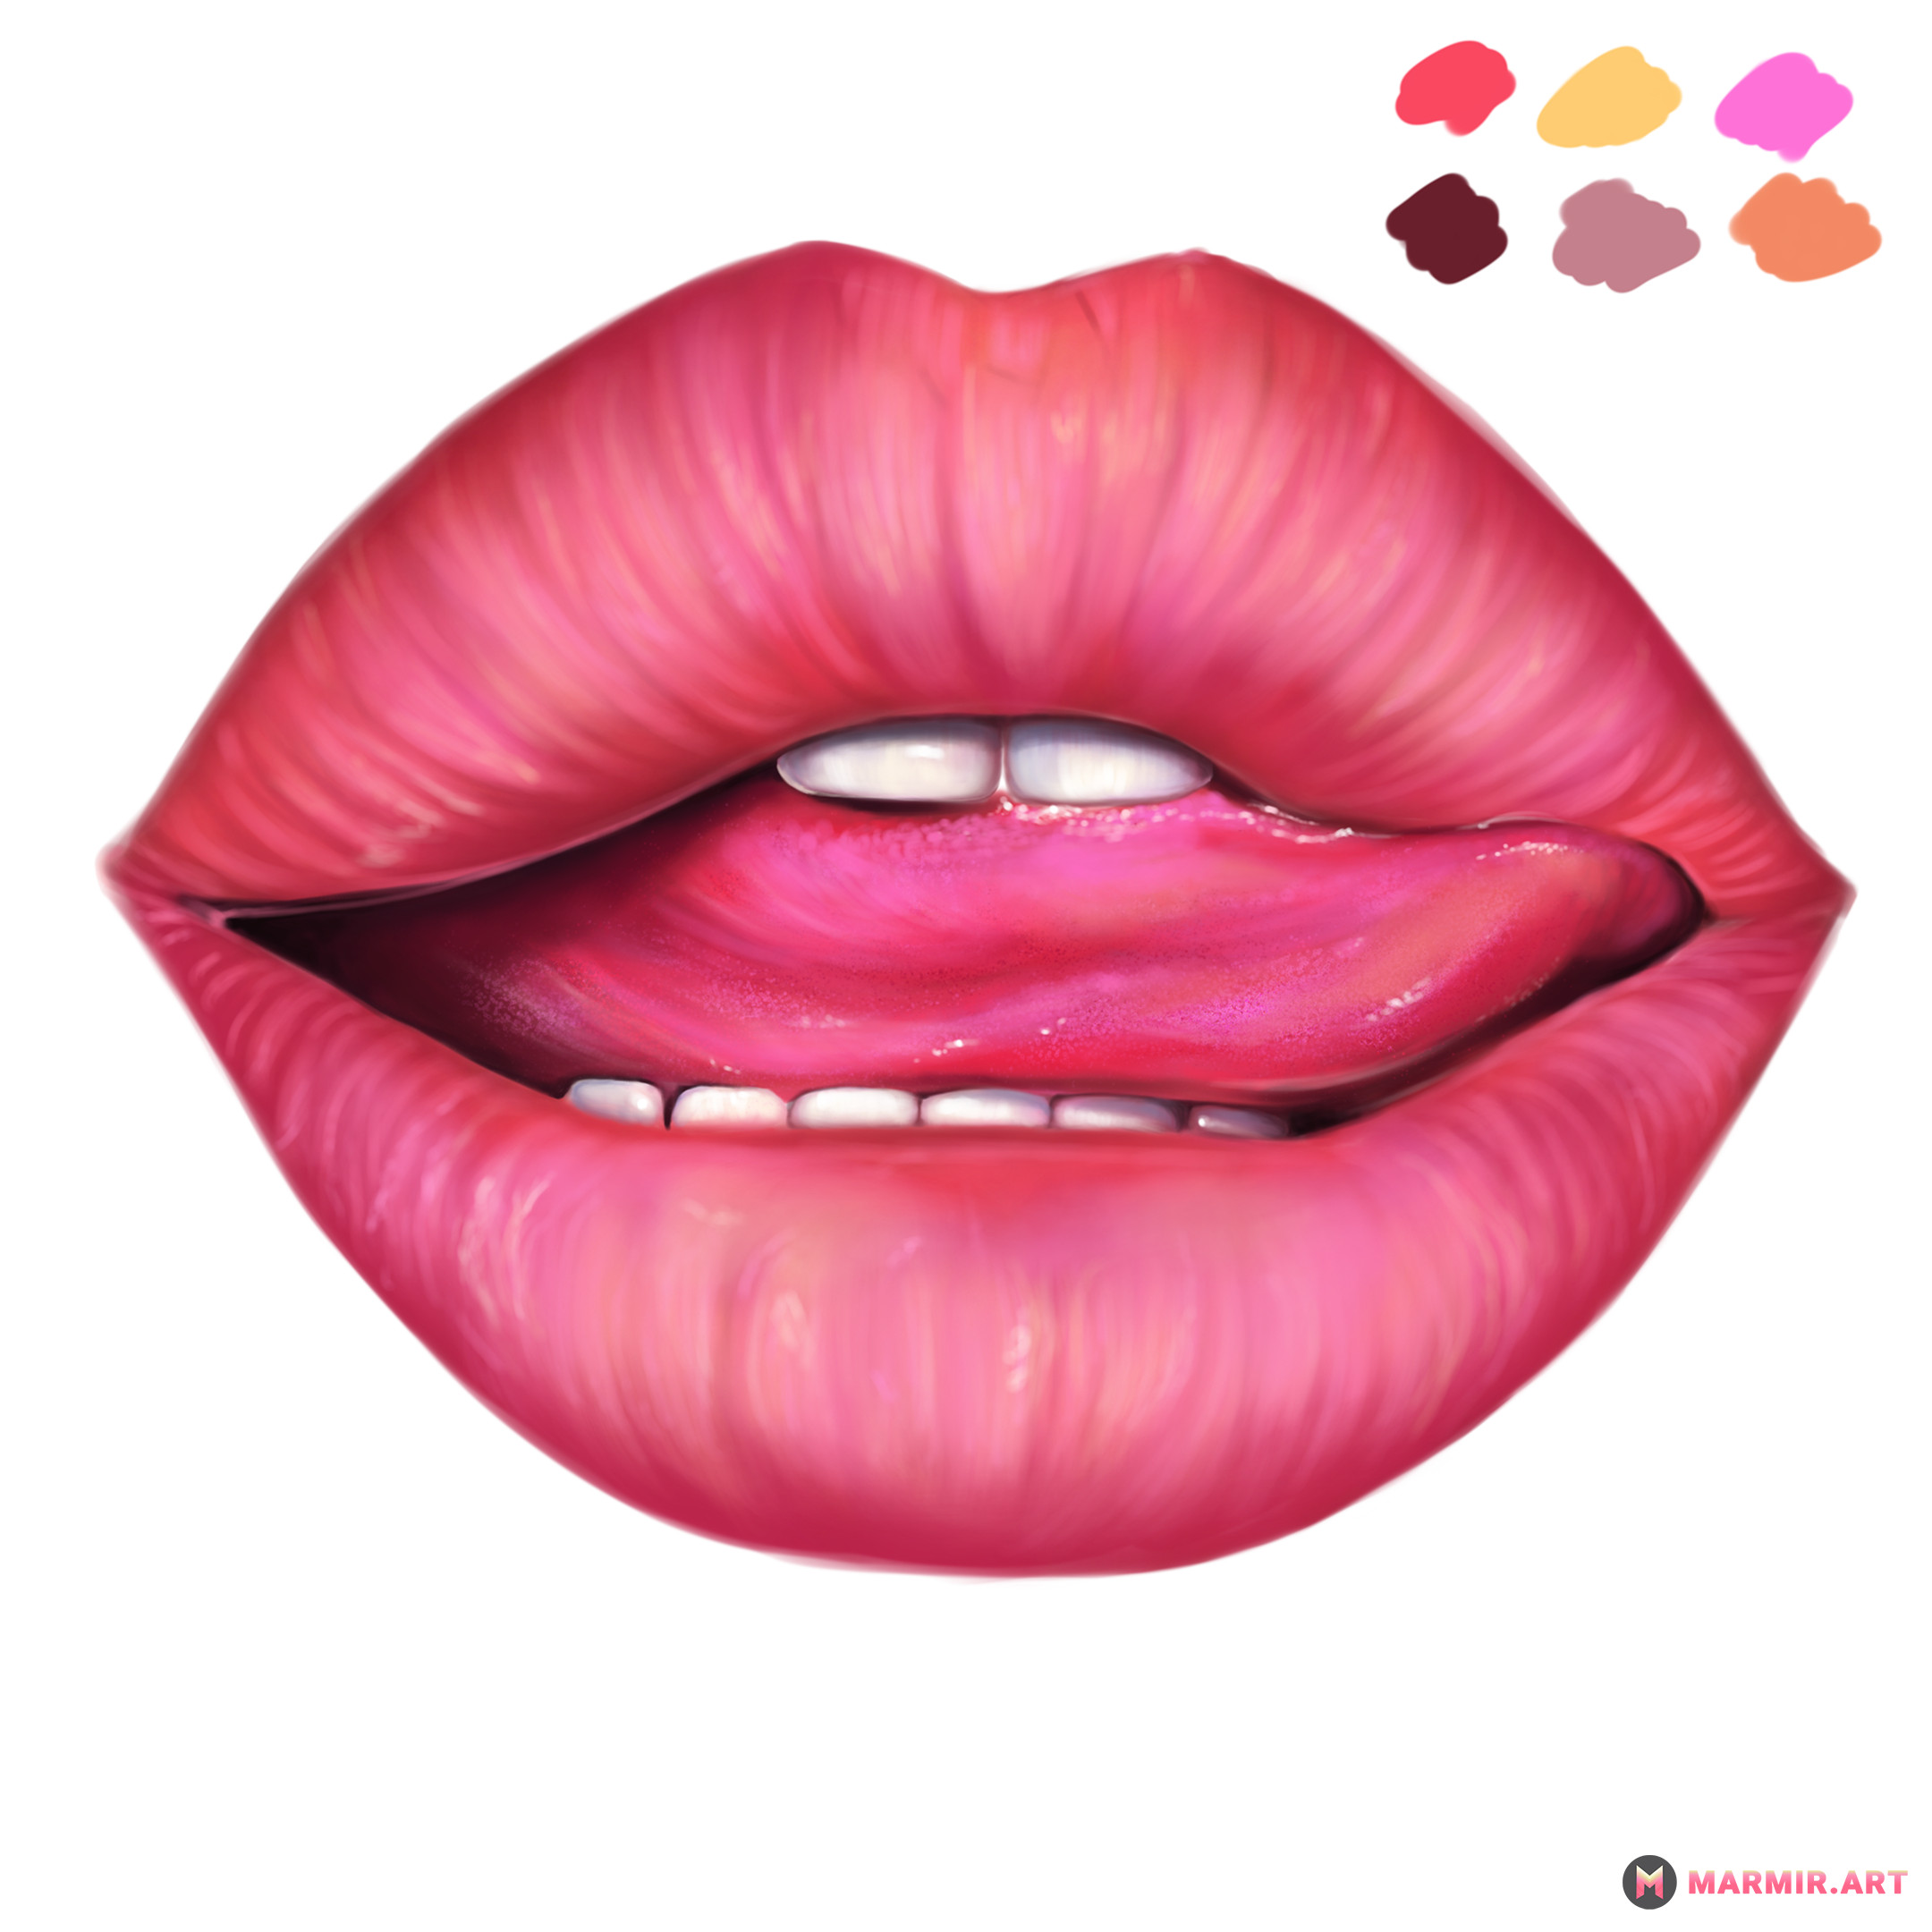 Glossy Lips - Step by step by SandraWinther on DeviantArt